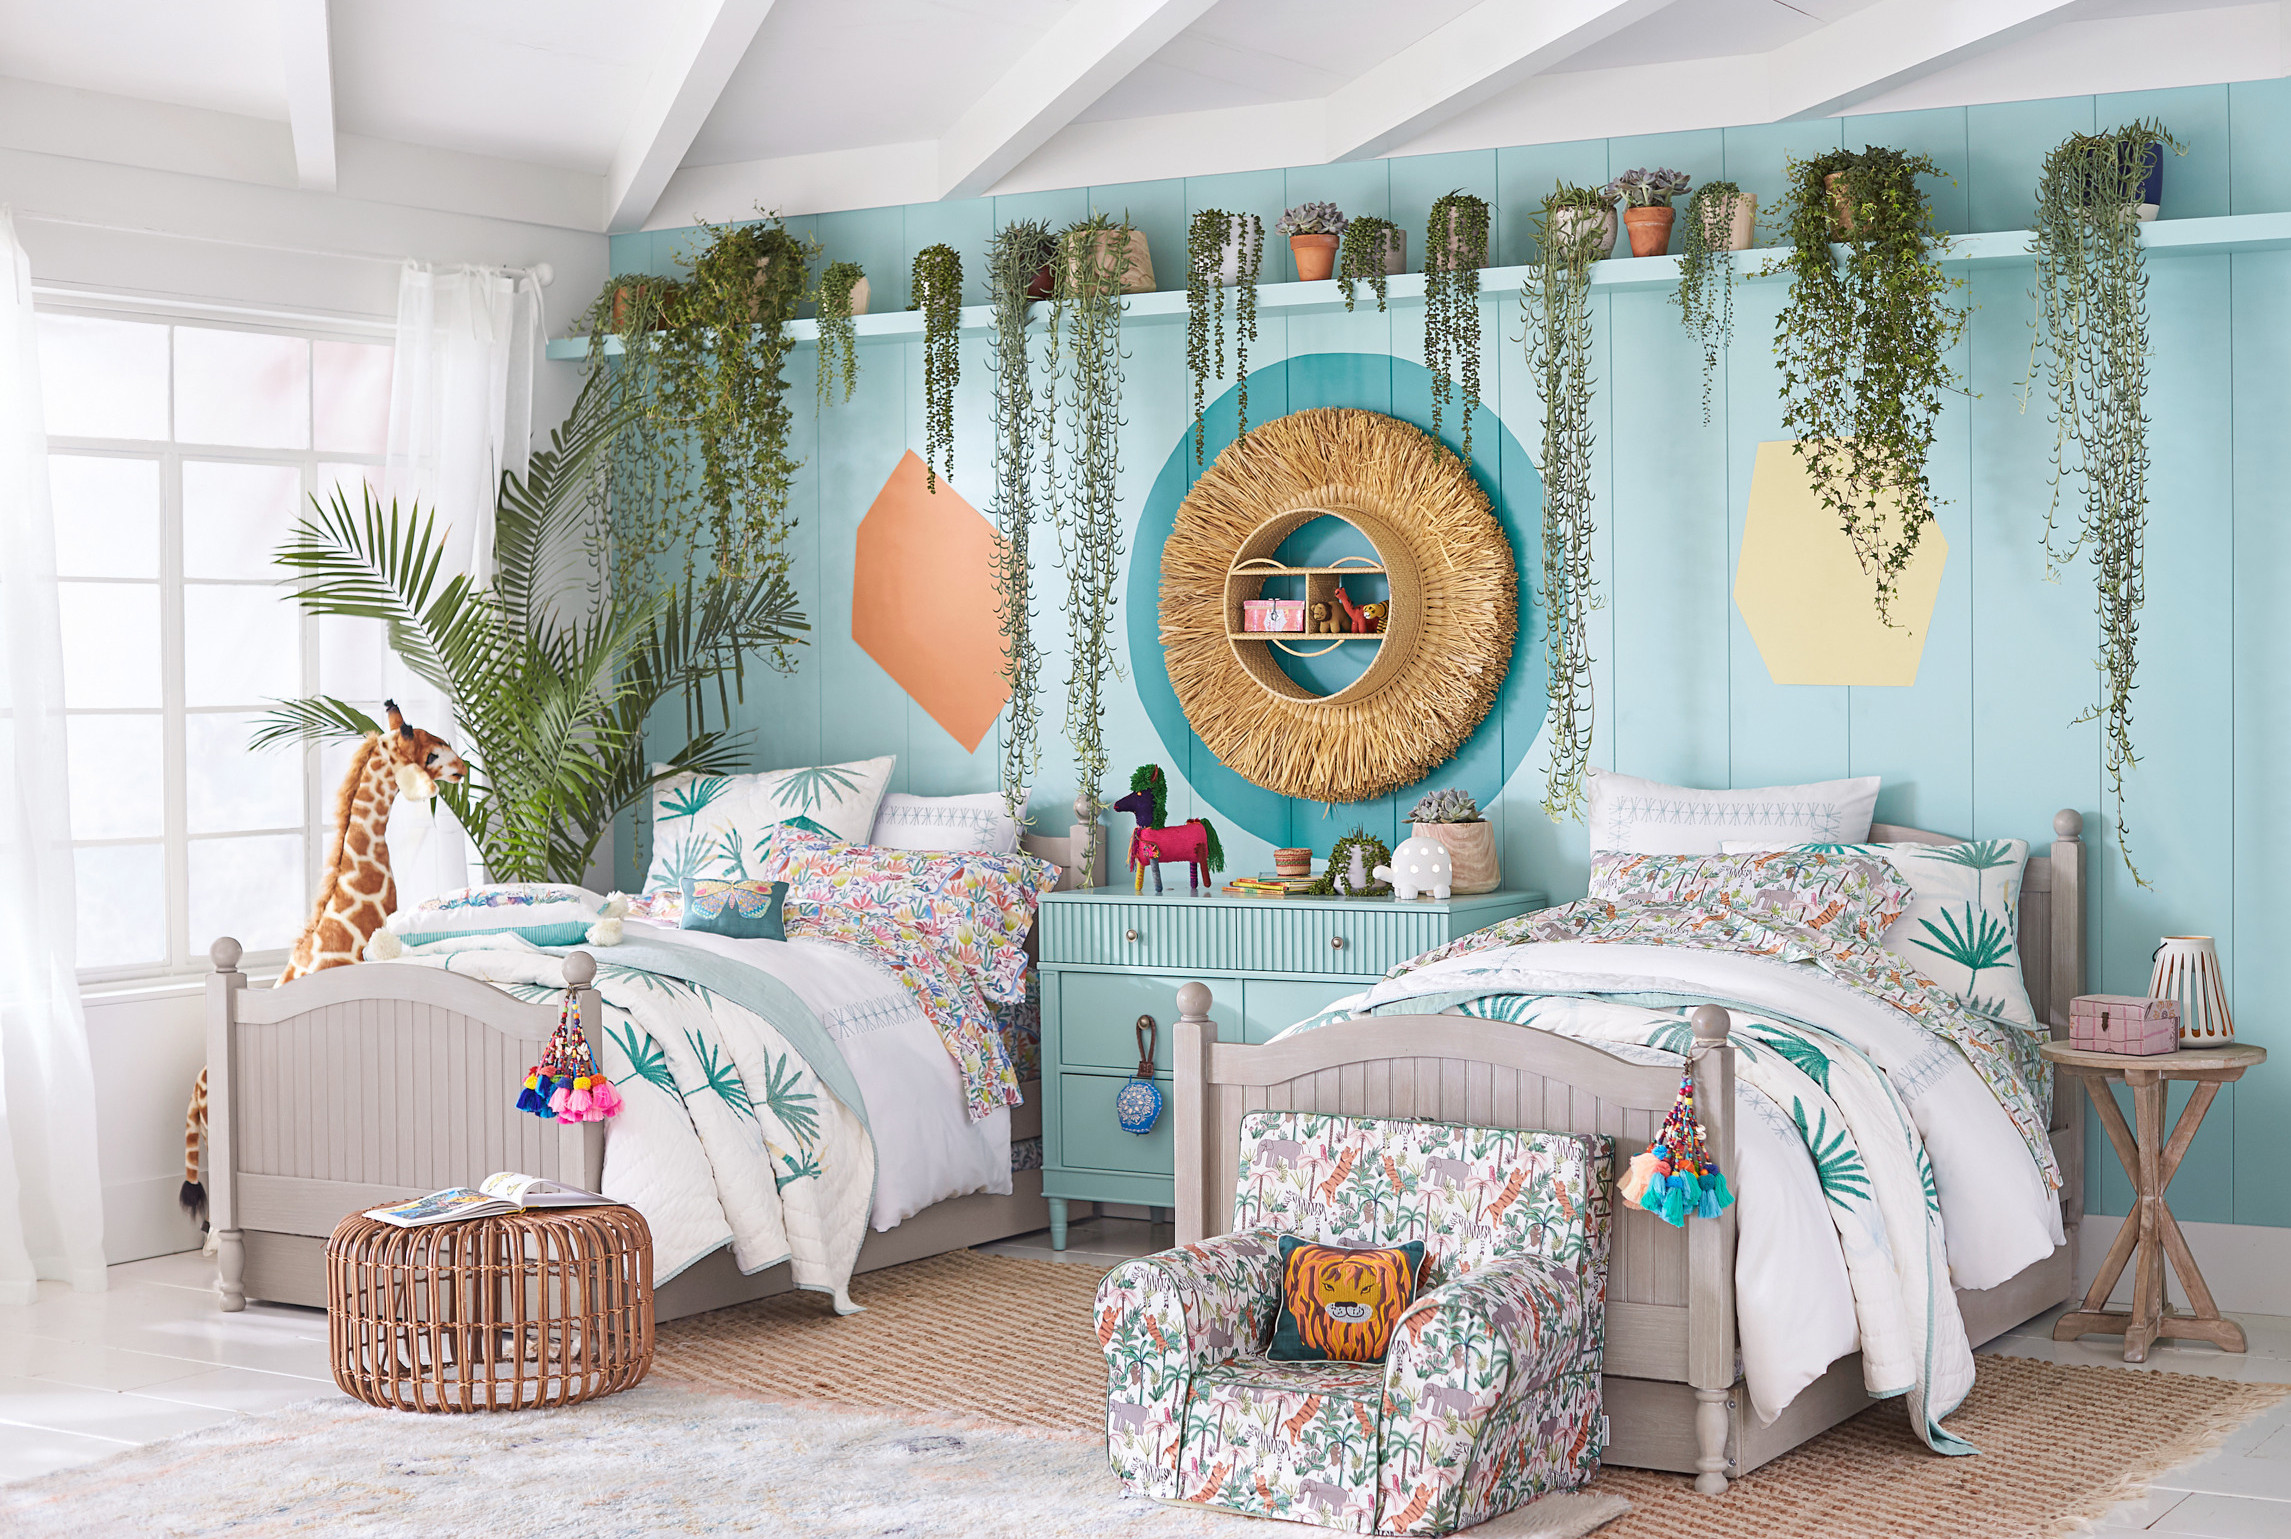 Pottery Barn Kids Room
 POTTERY BARN KIDS UNVEILS BRIGHT BOHEMIAN COLLECTION WITH